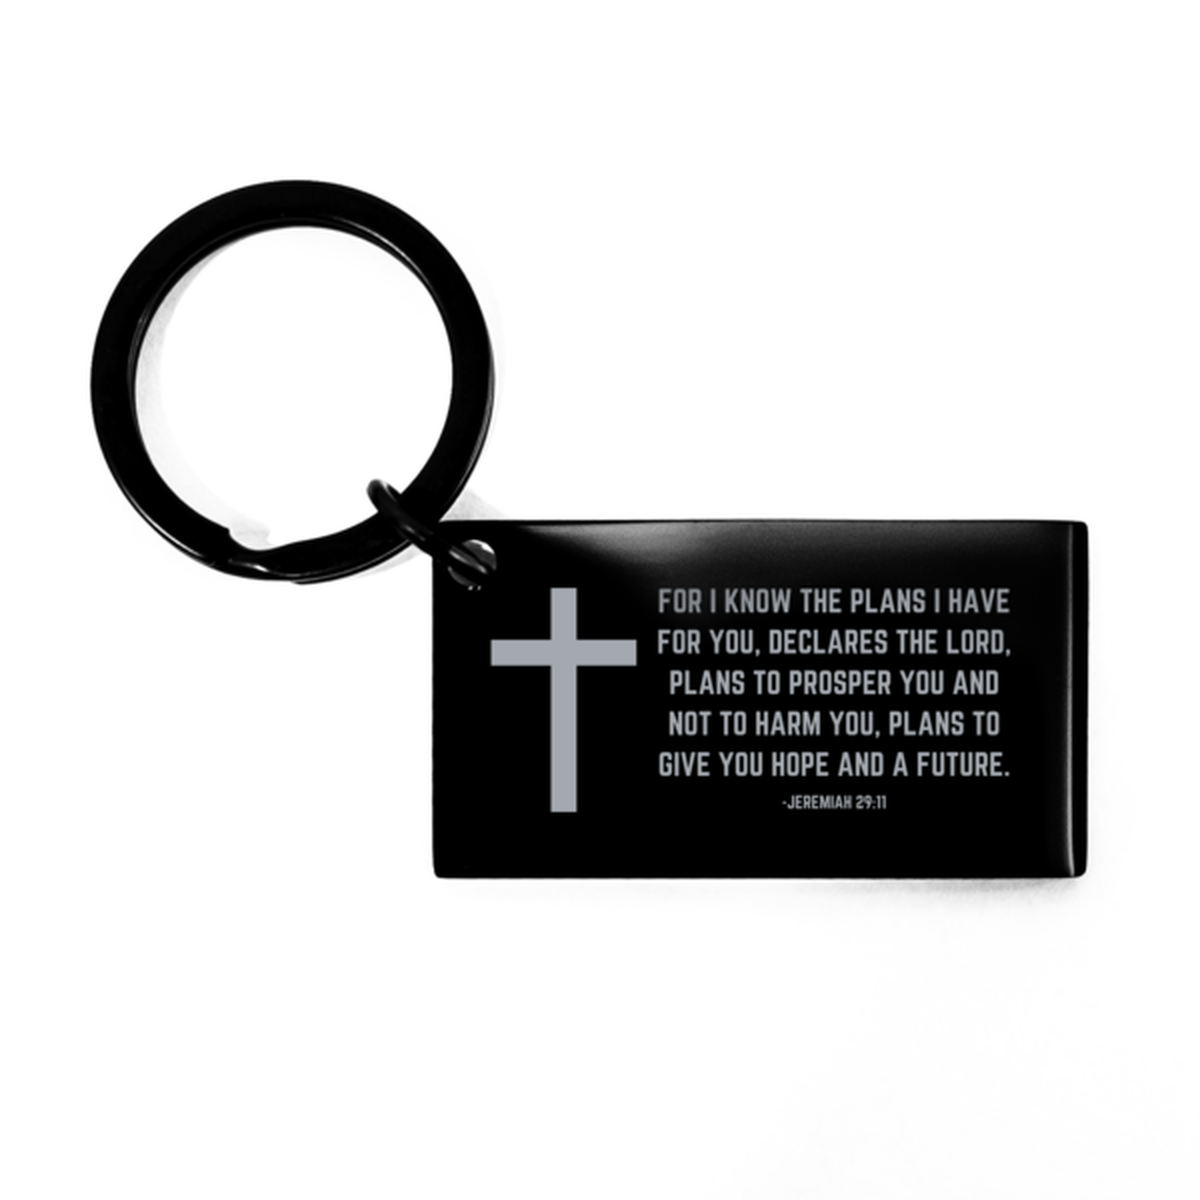 Baptism Gifts For Teenage Boys Girls, Christian Bible Verse Black Keychain, For I know the plans, Confirmation Gifts, Bible Verse Keyring for Son, Godson, Grandson, Nephew